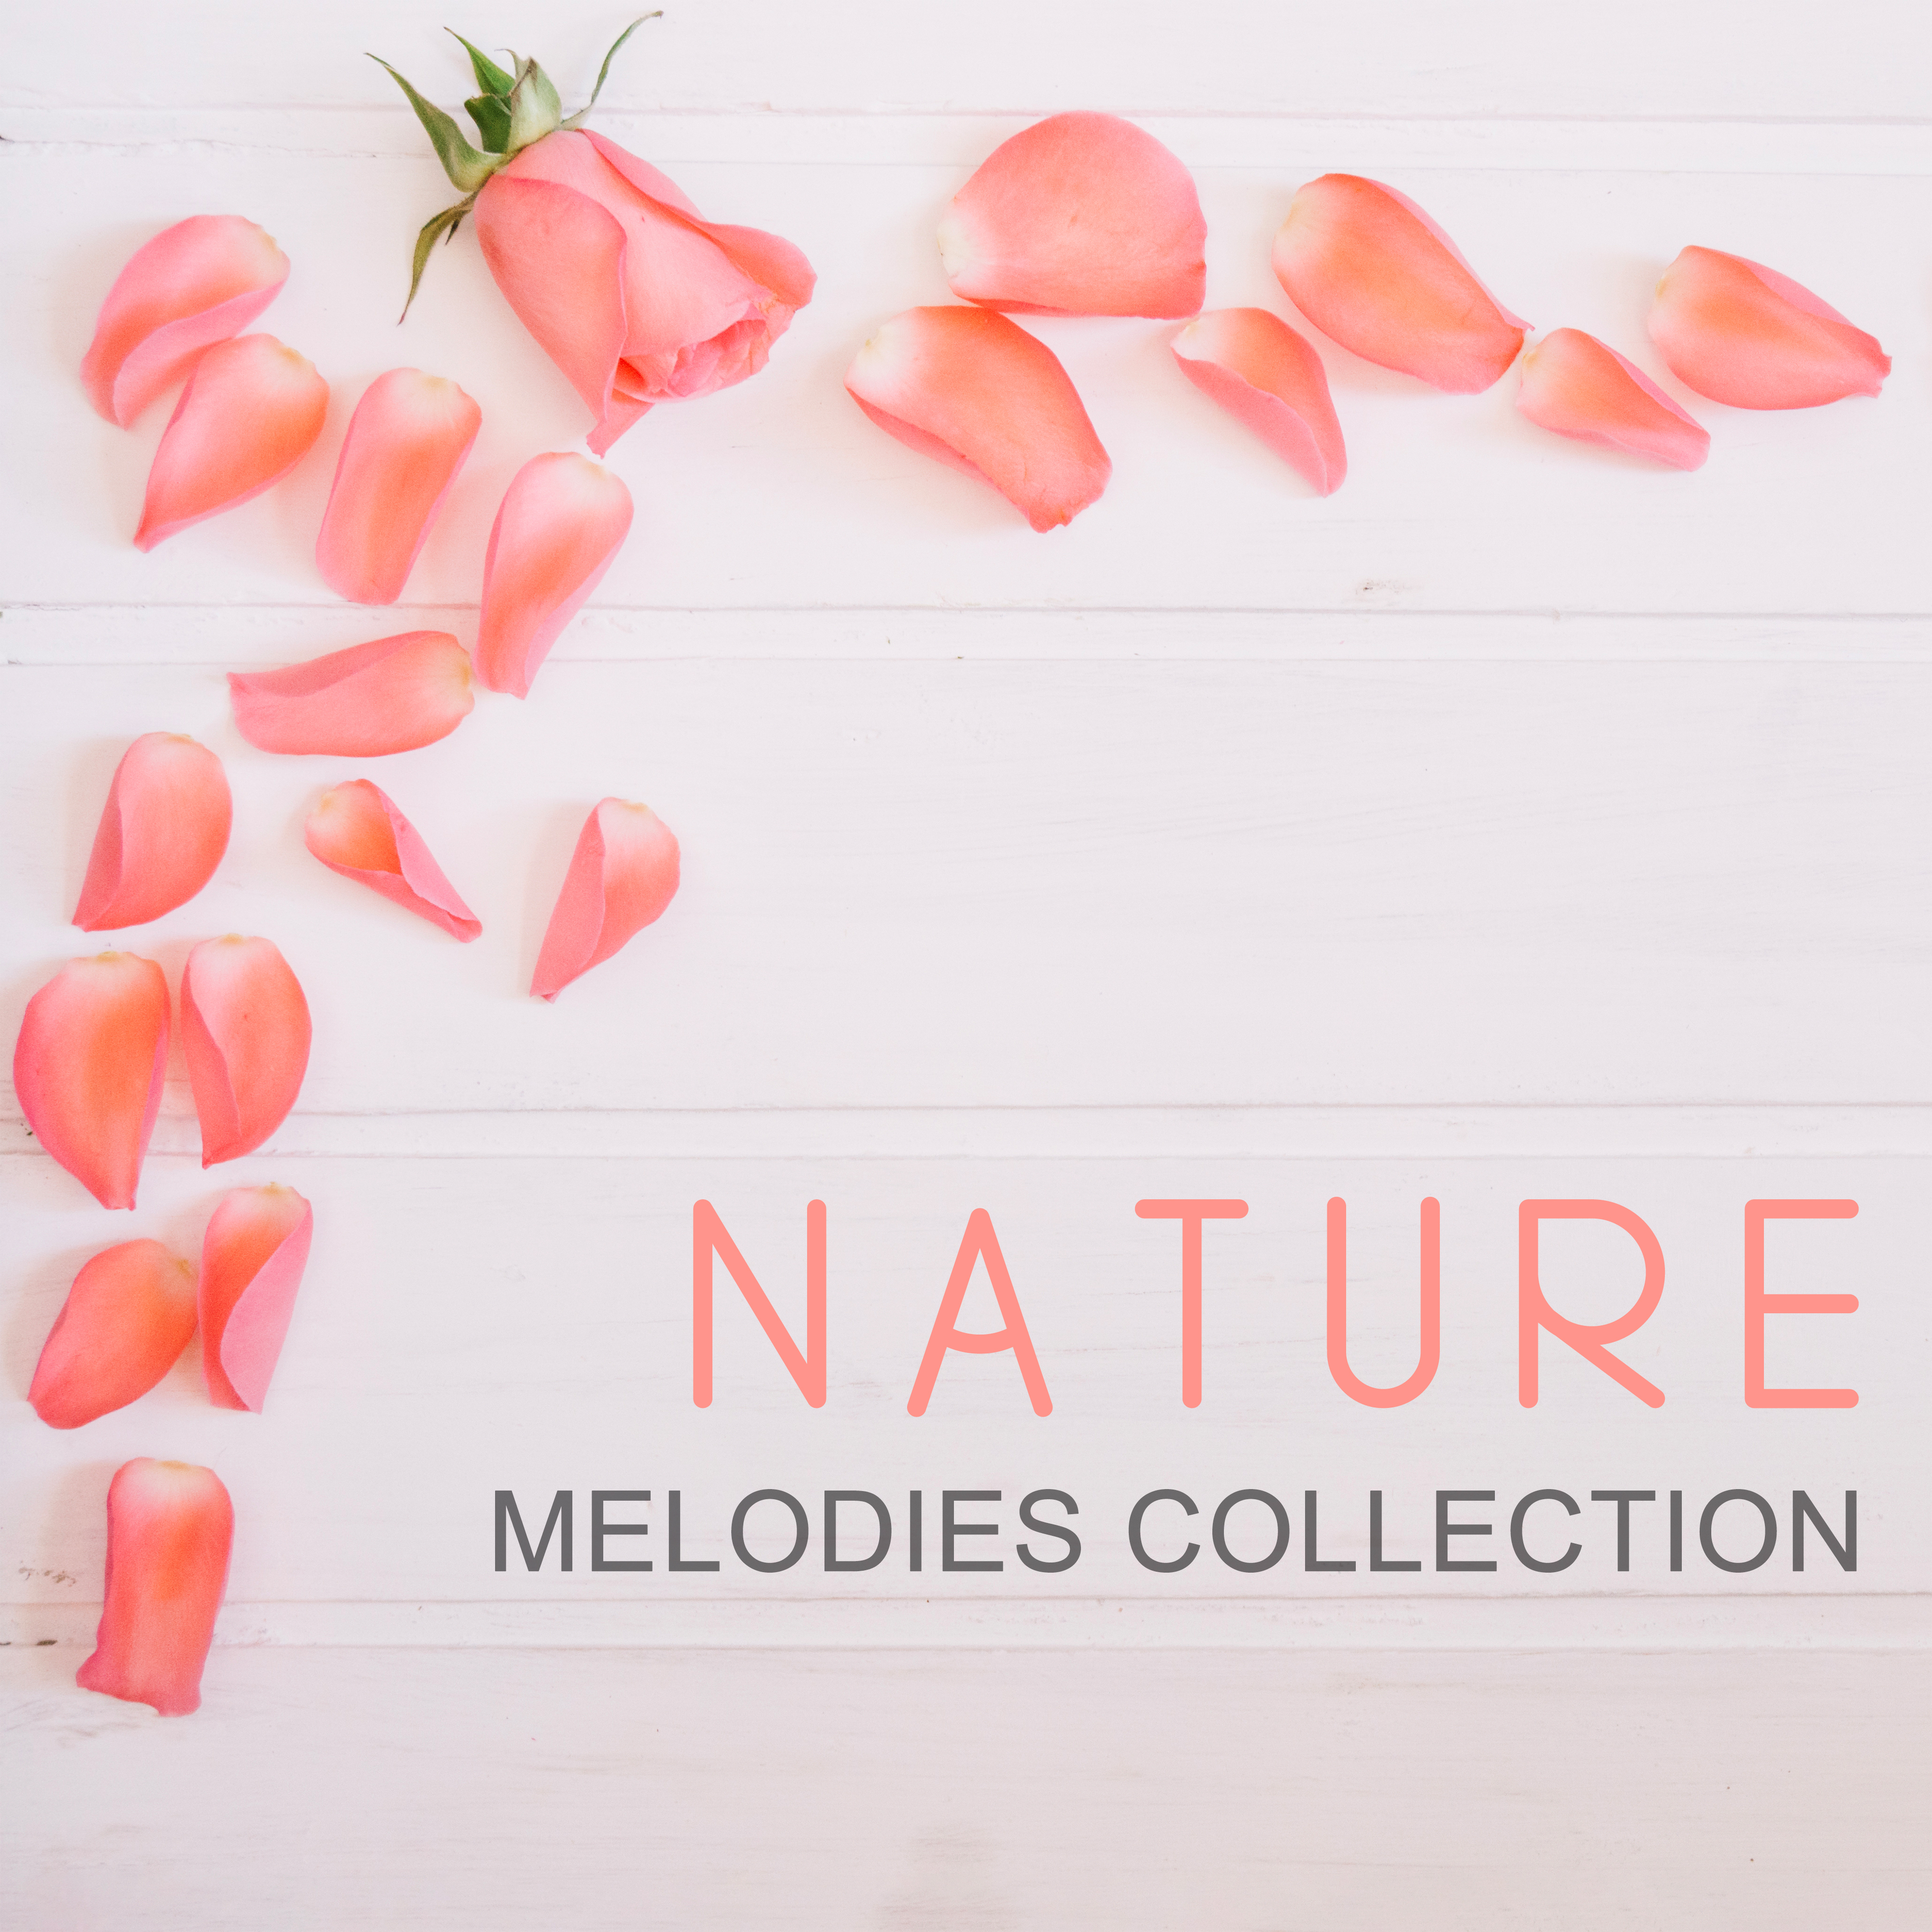 Nature Melodies Collection